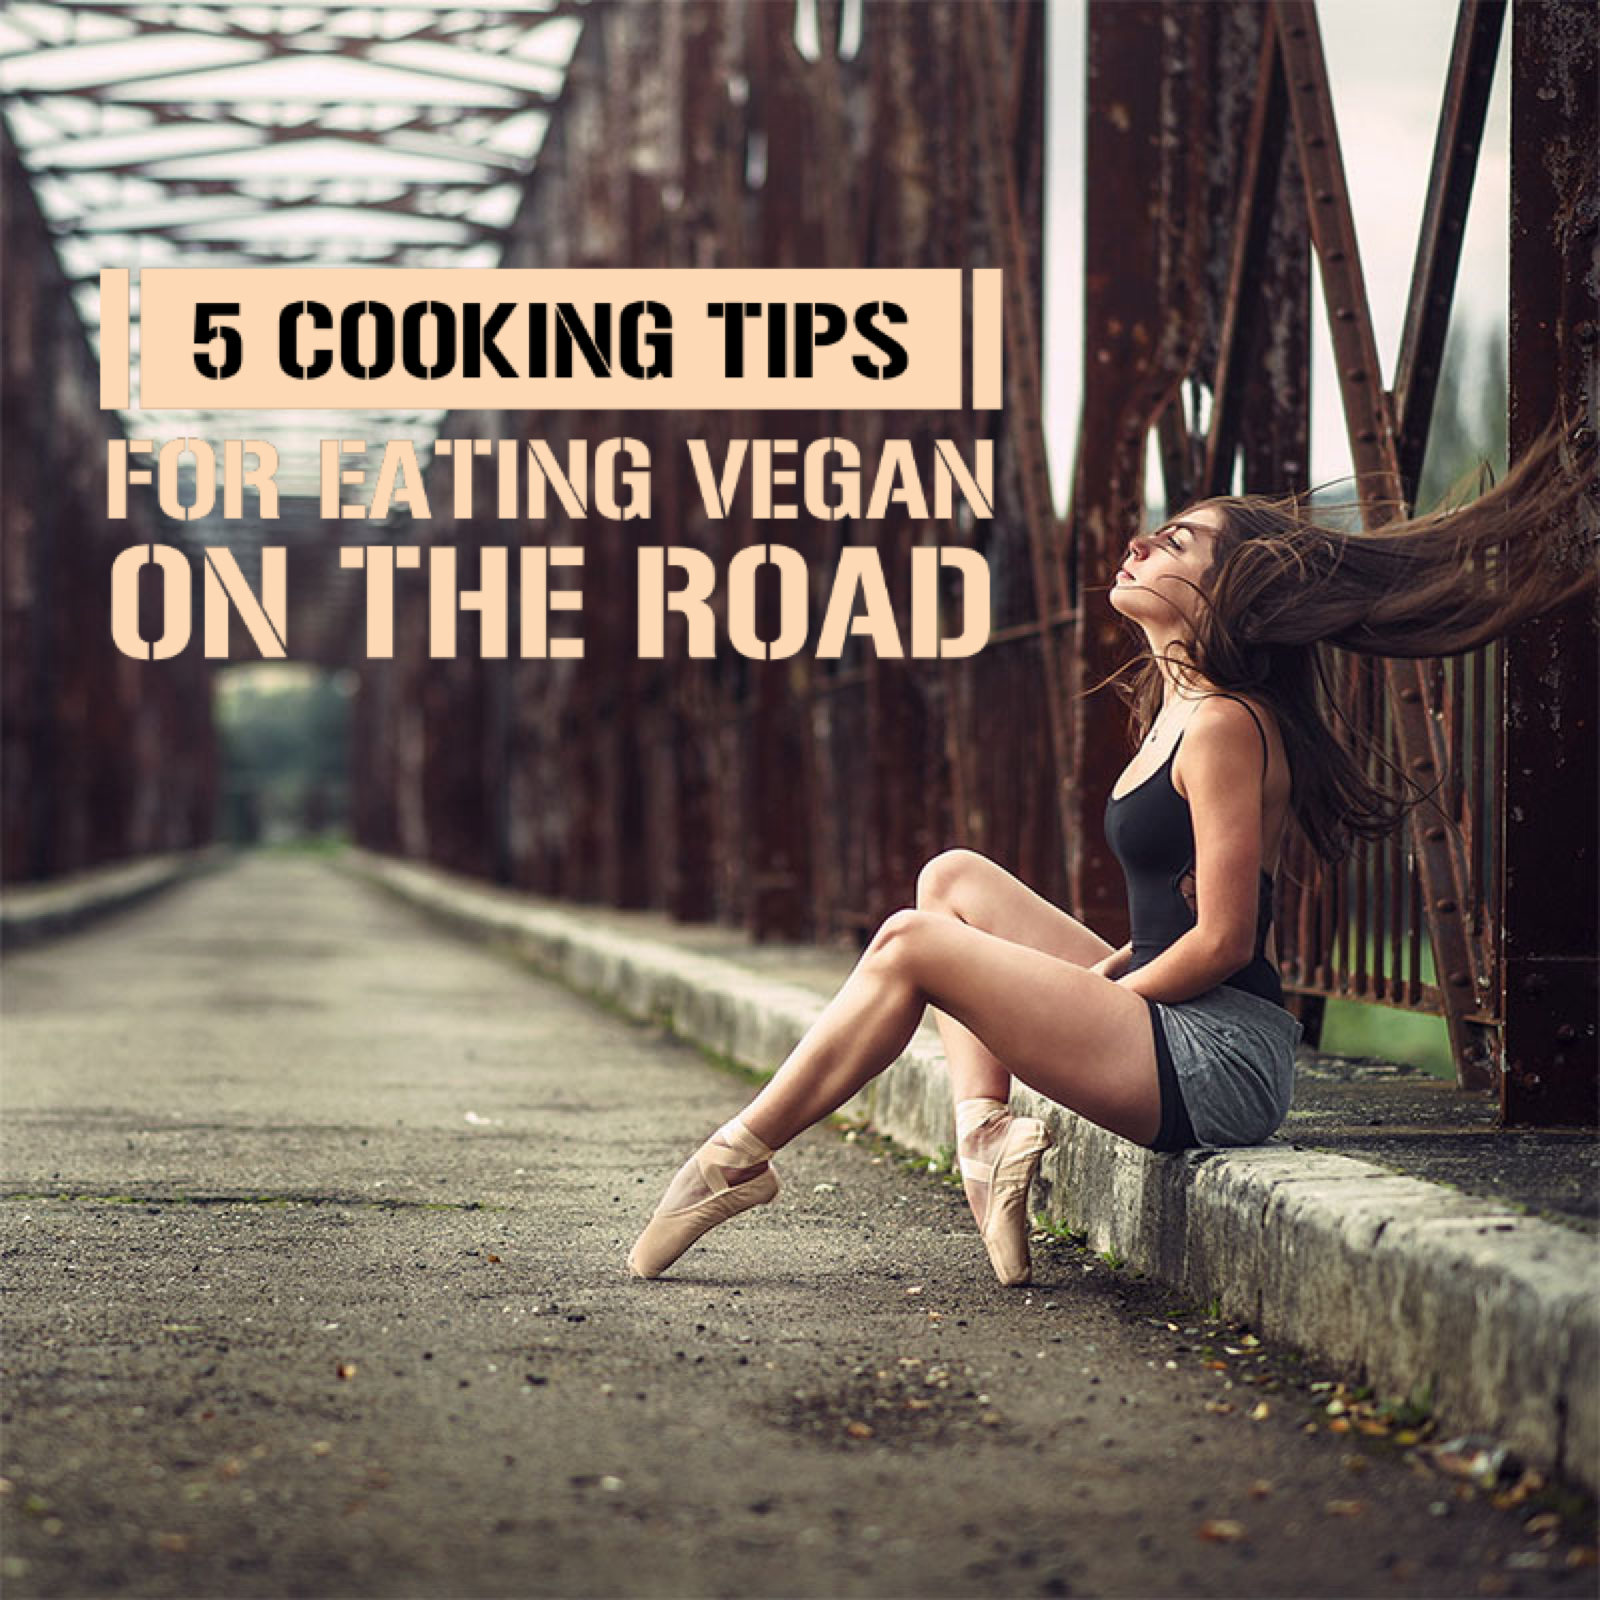 5 Cooking Tips For Eating Vegan On The Road Or in Small Spaces.